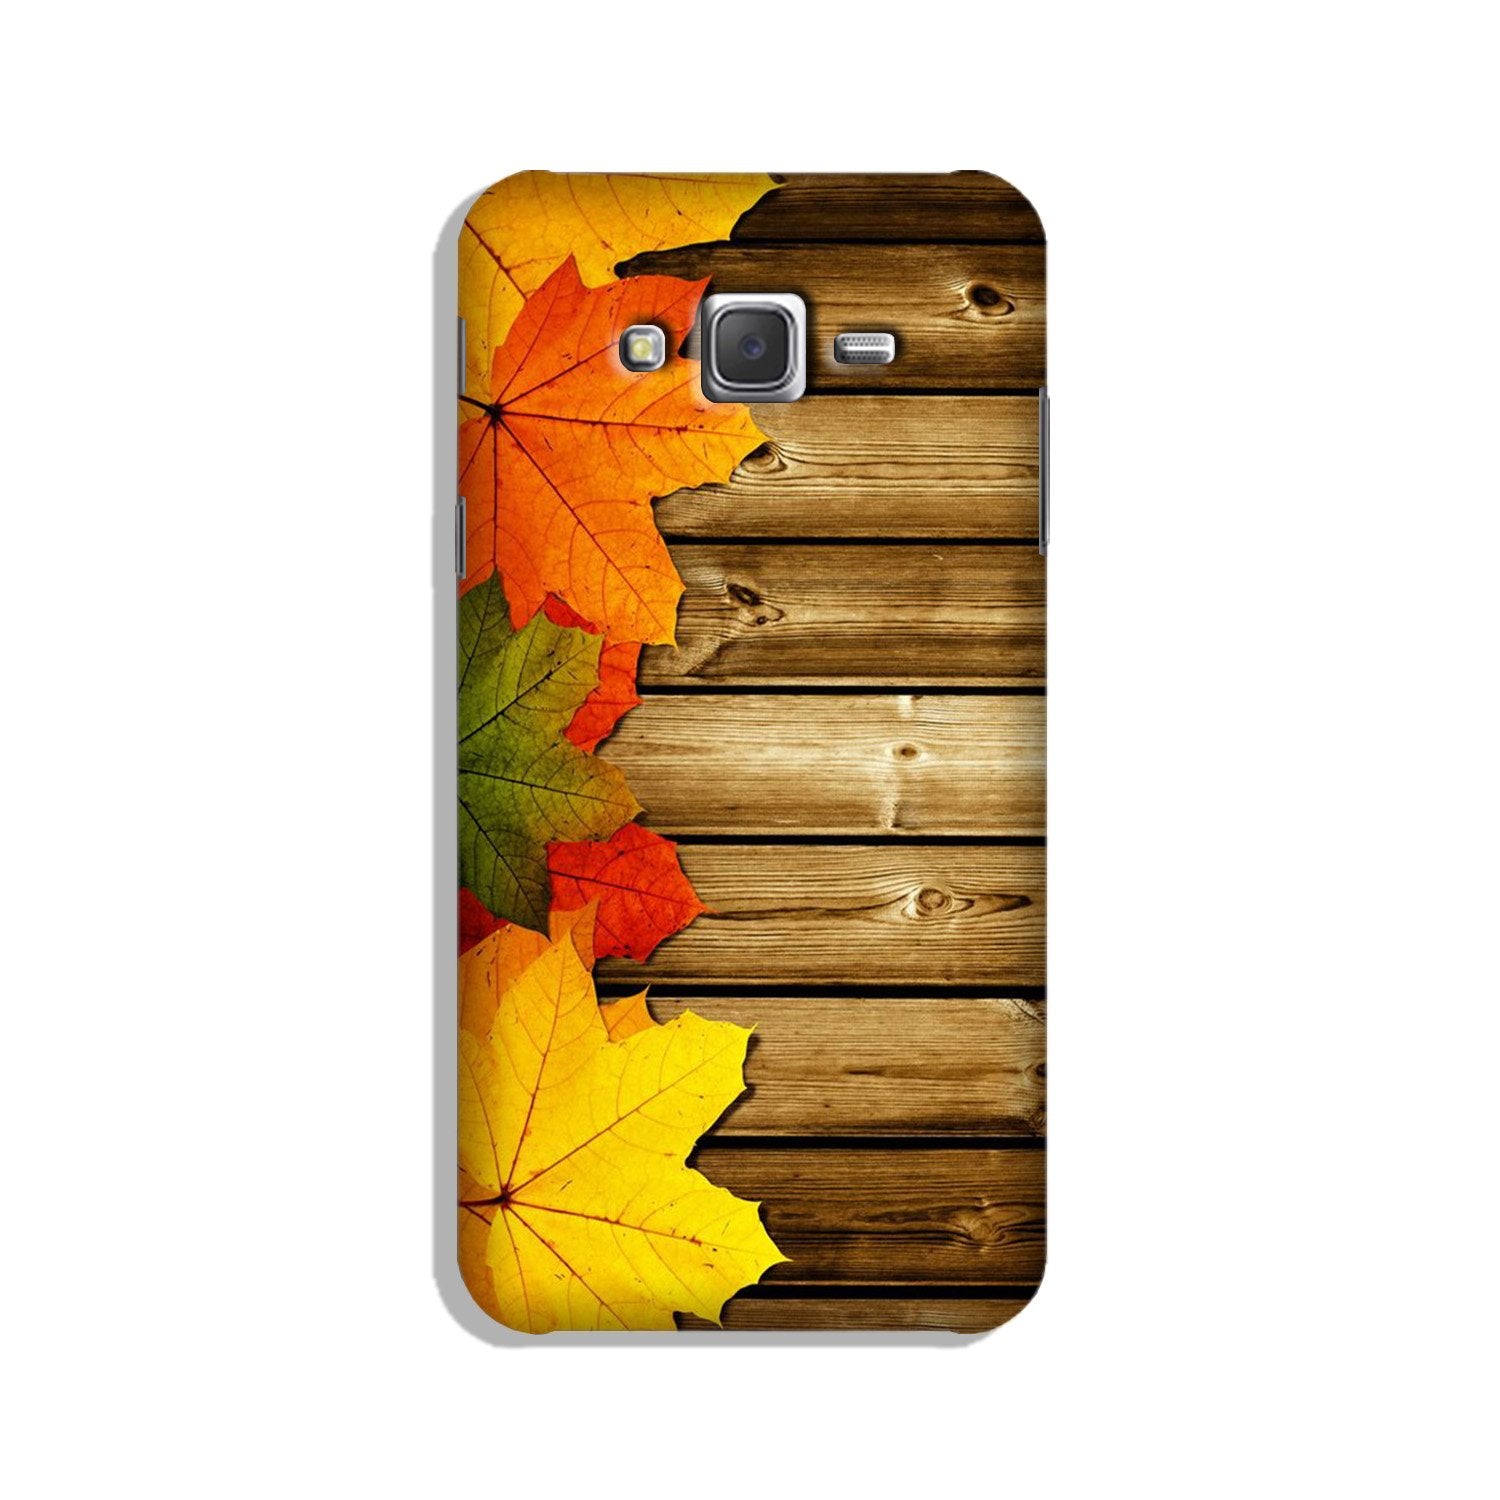 Wooden look3 Case for Galaxy J3 (2015)